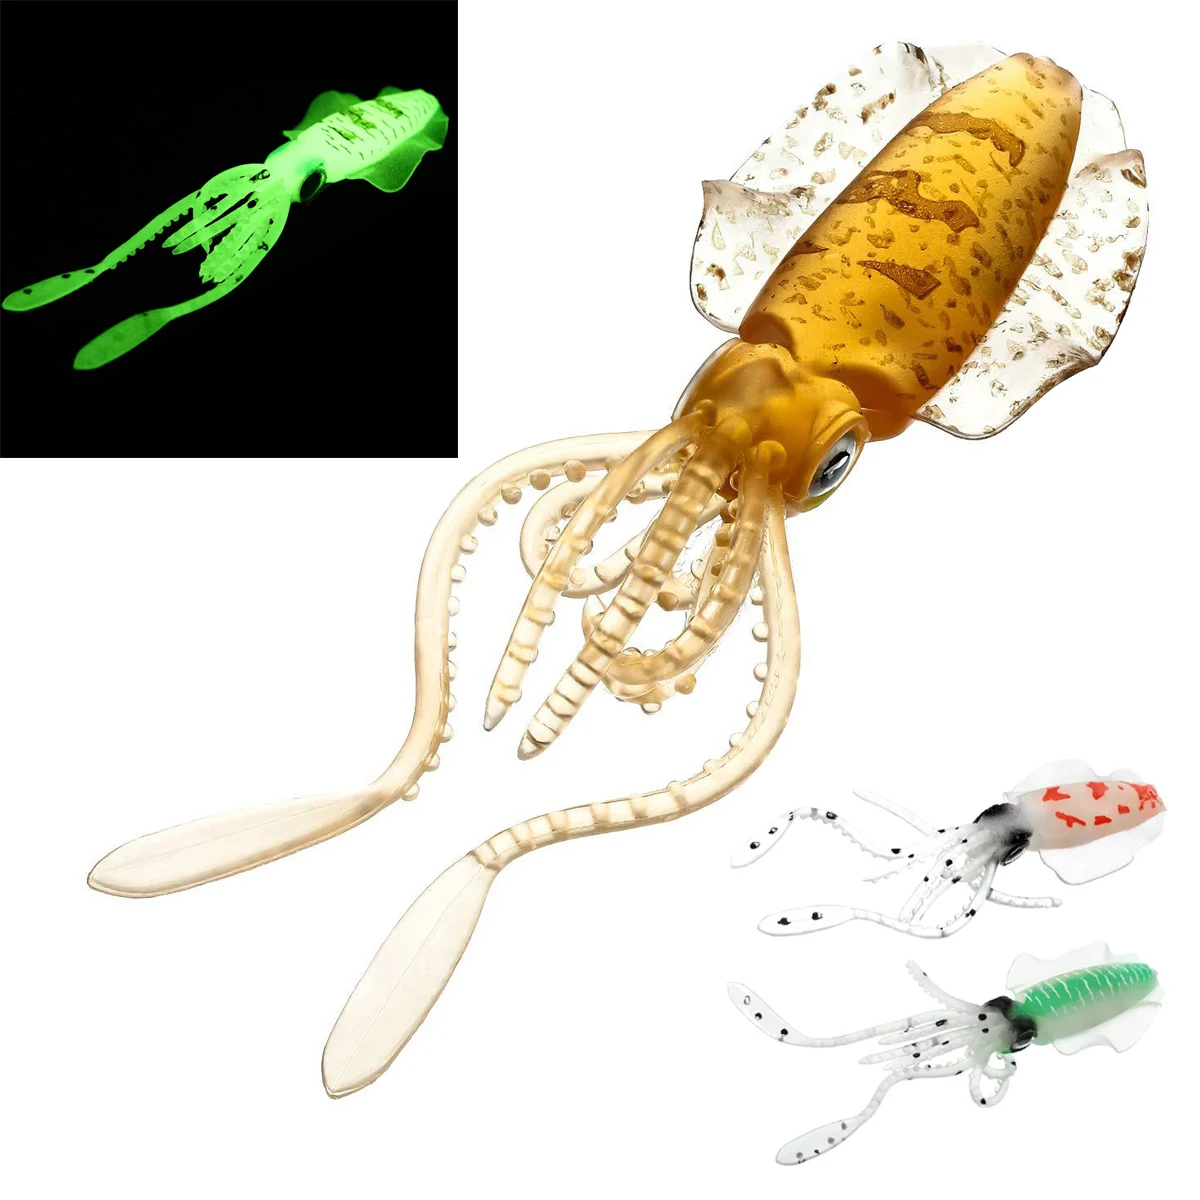 

6inch Simulation Squid Fishing Lures Bait Kit 3D Eyes Luminous Octopus for Sea Fishing Wobbler Bait Wonderful Baits for Anglers